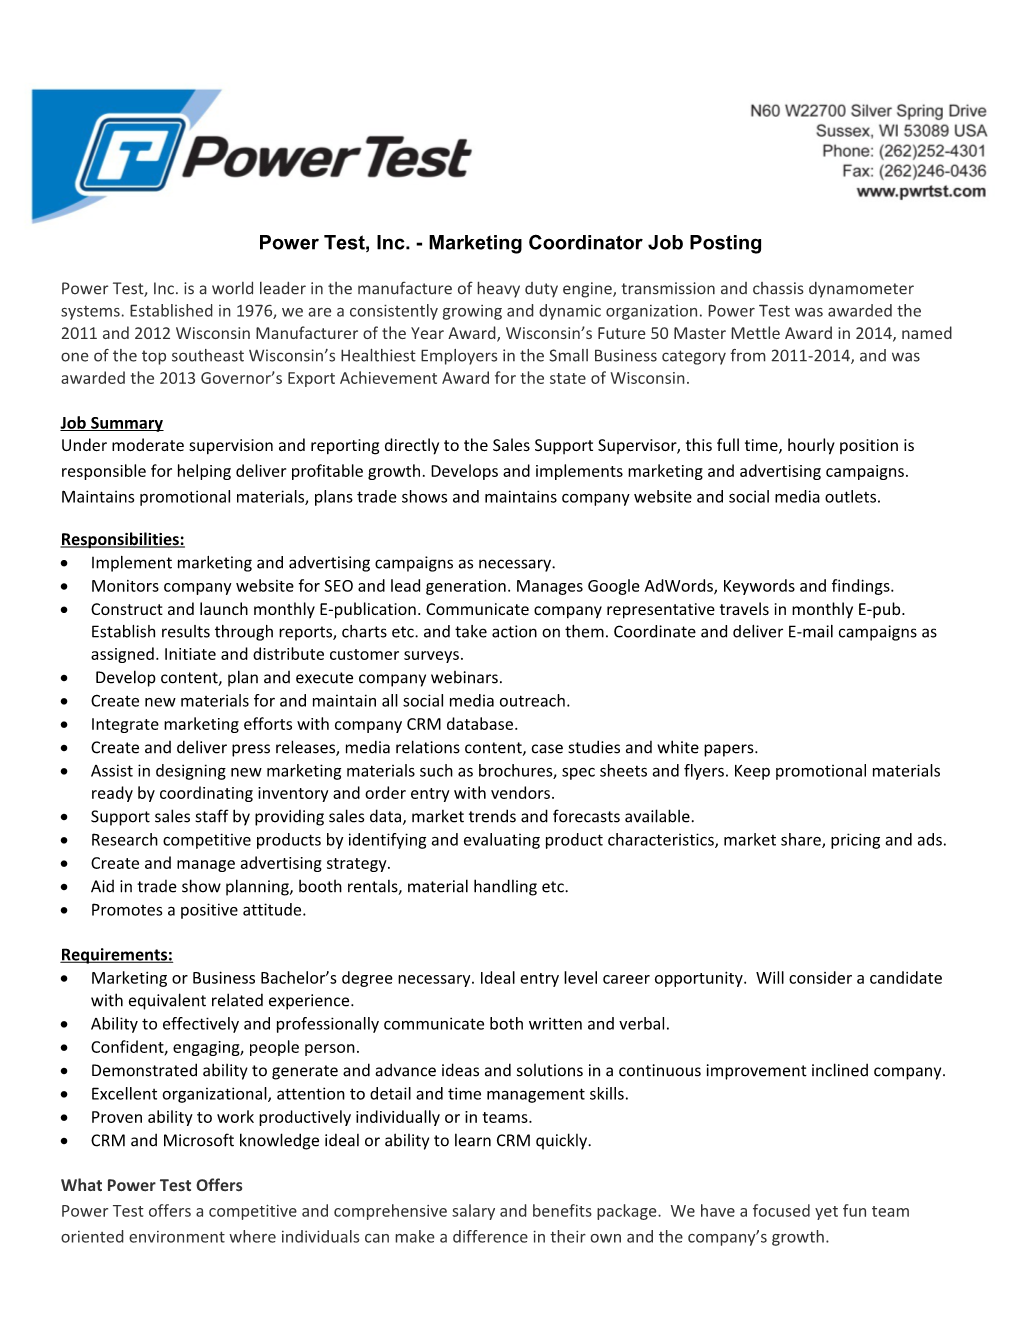 Power Test, Inc. Is a World Leader in the Manufacture of Heavy Duty Engine, Transmission